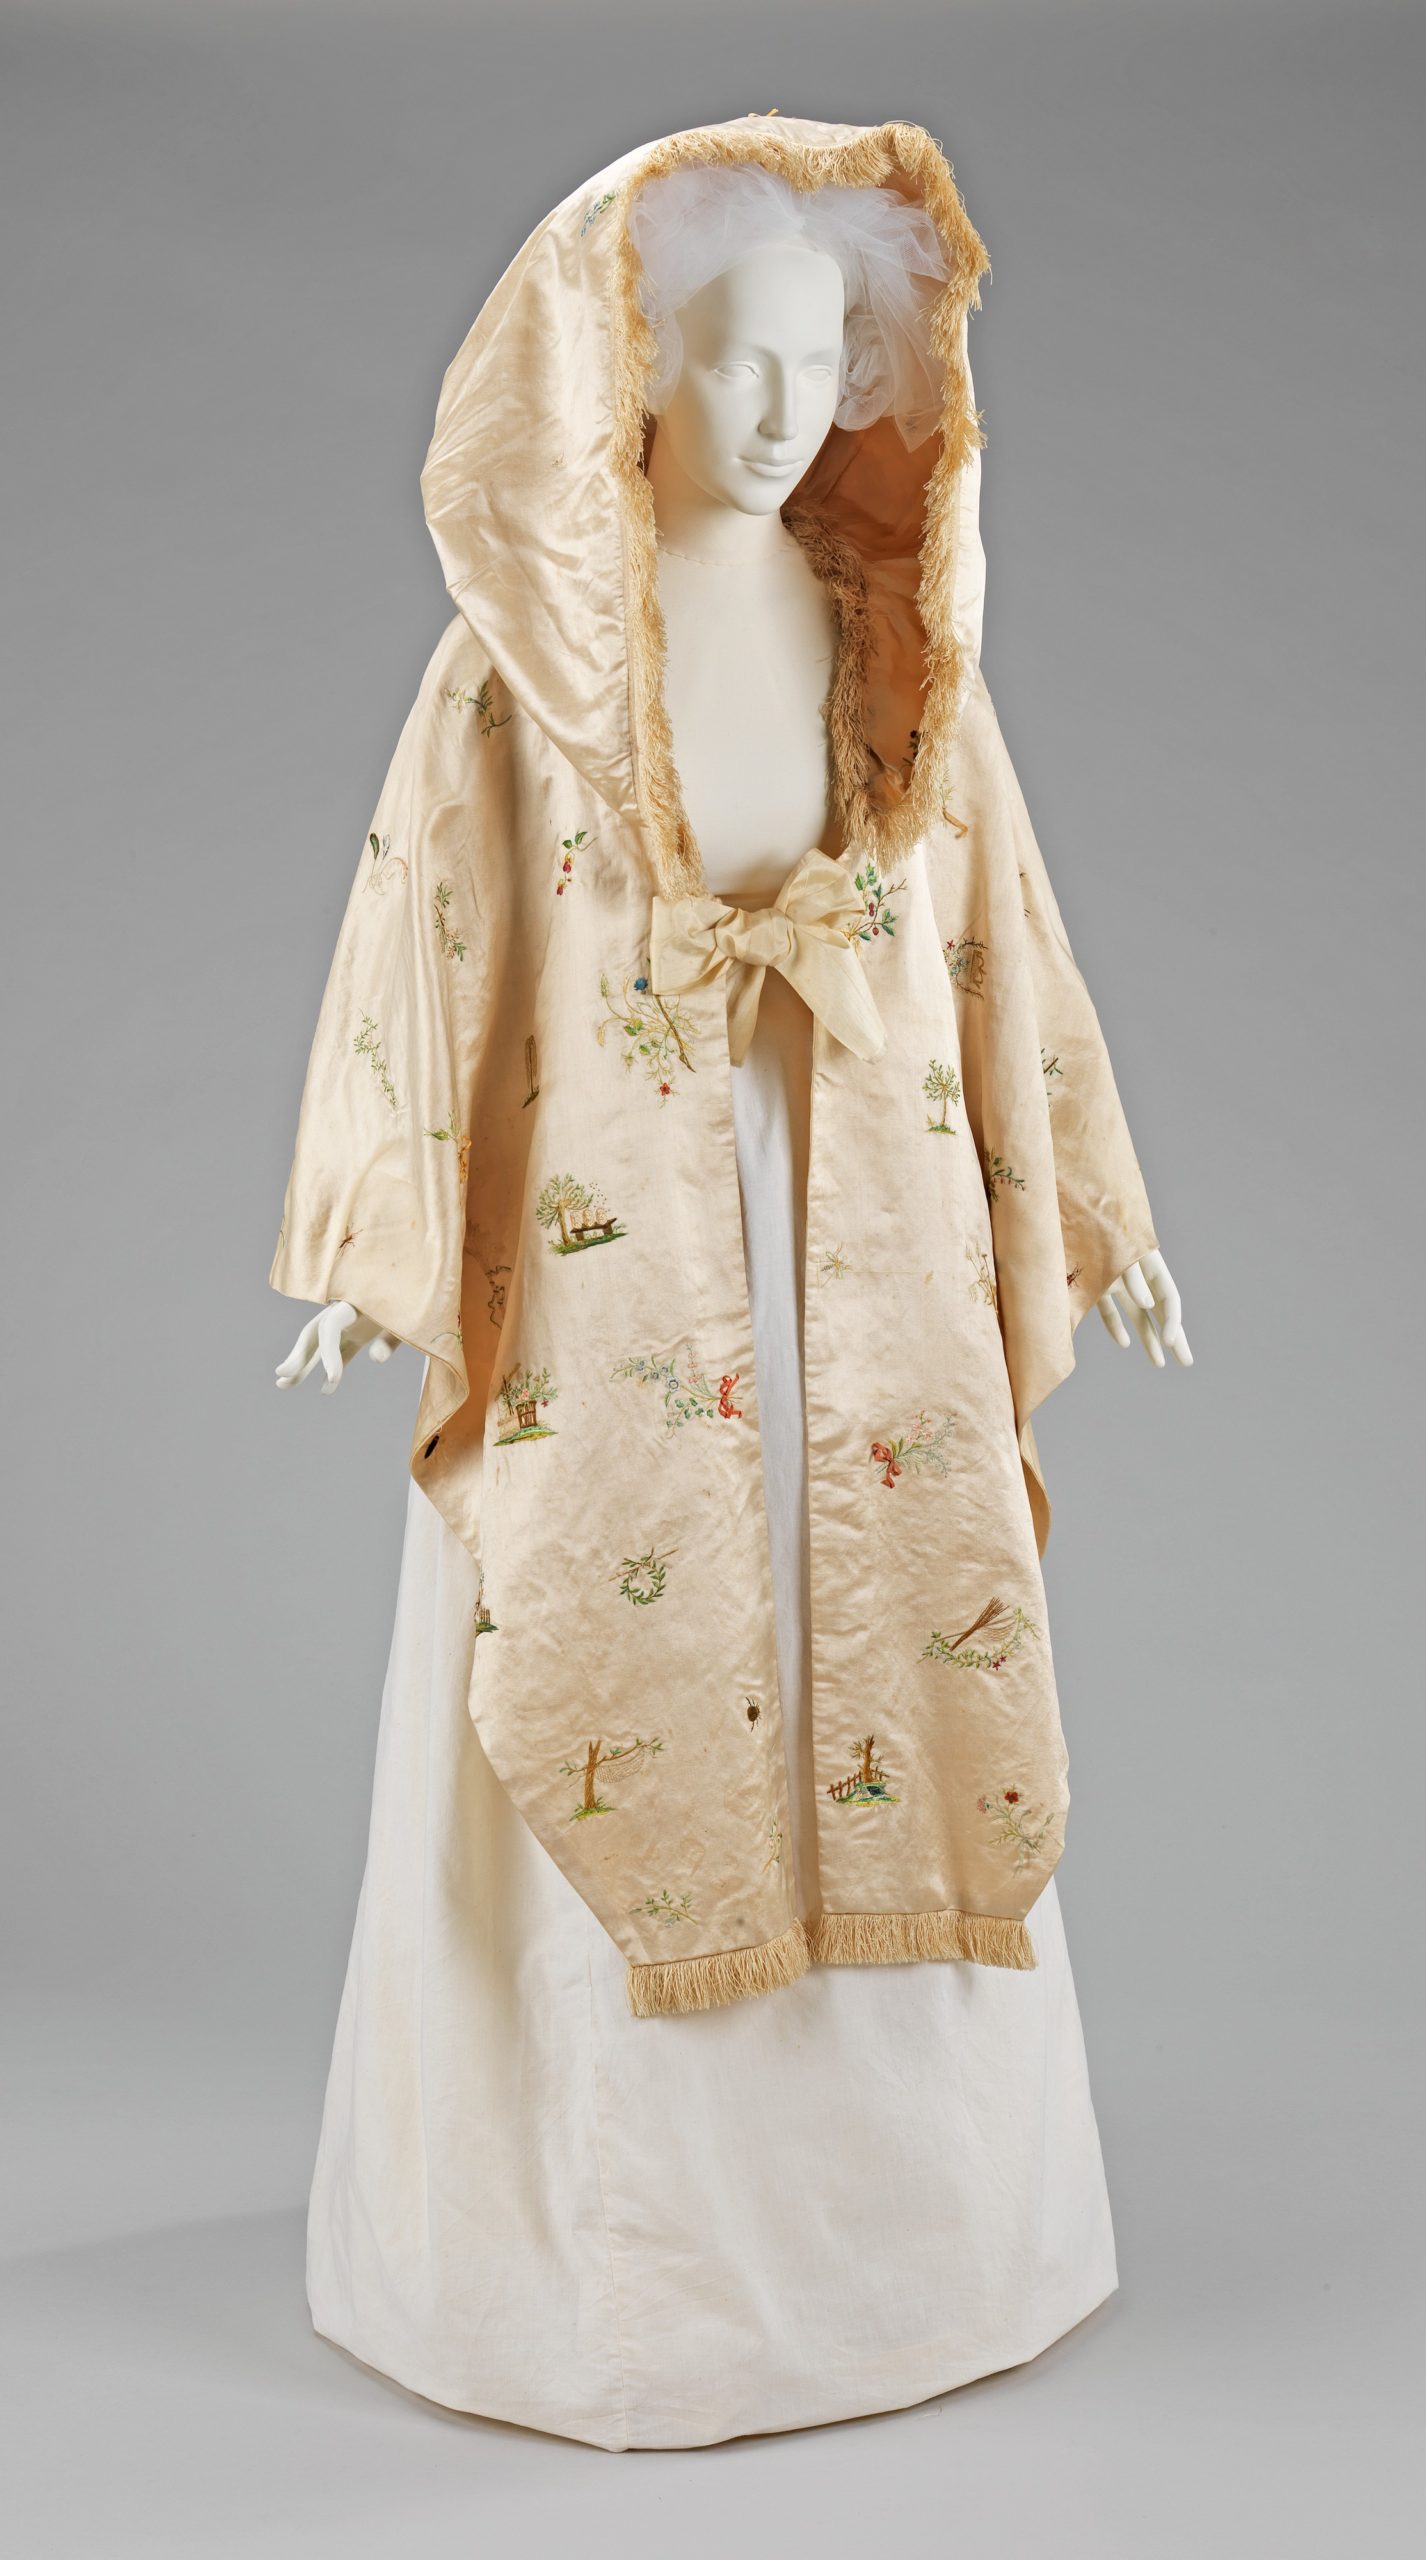 Cape, 1795–1800, British, silk, Brooklyn Museum Costume Collection at The Metropolitan Museum of Art; 2009.300.3890